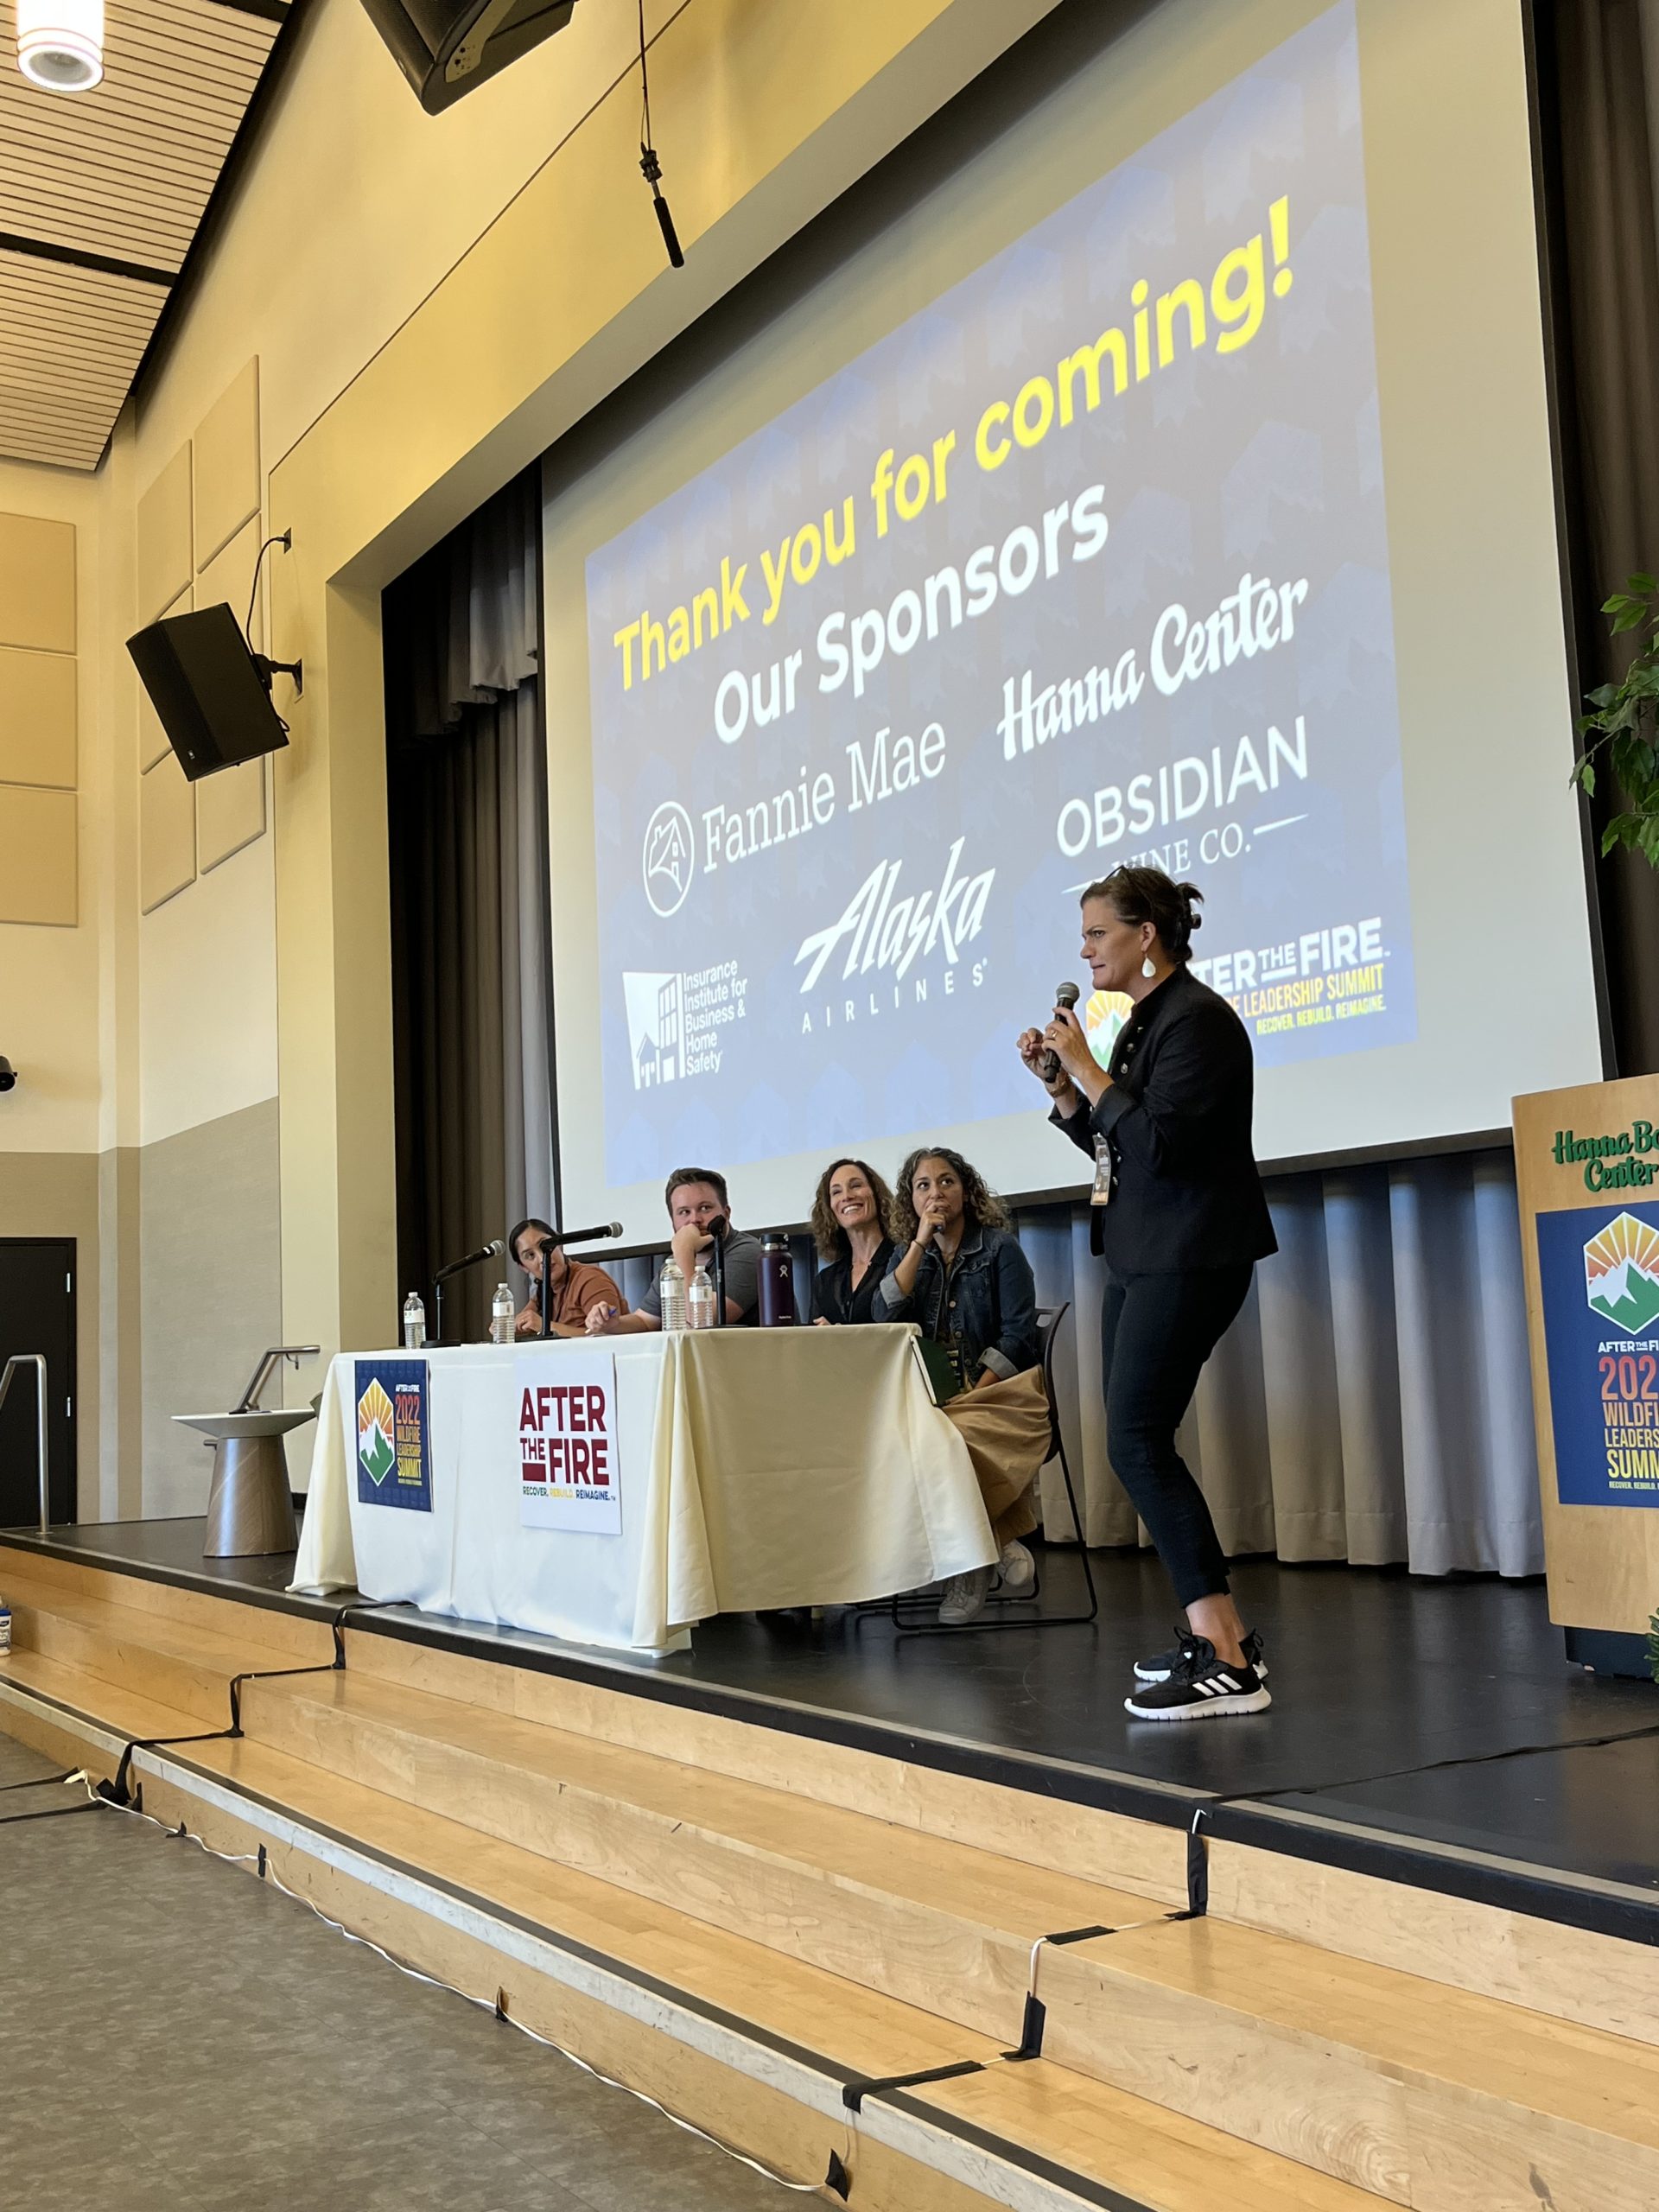 Following the panel on philanthropy, Jennifer Gray Thompson takes a moment to pay special thanks to the sponsors of the Wildfire Leadership Summit: Fannie Mae, Alaska Airlines, Hanna Center, IBHS, and Obsidian Wine Company